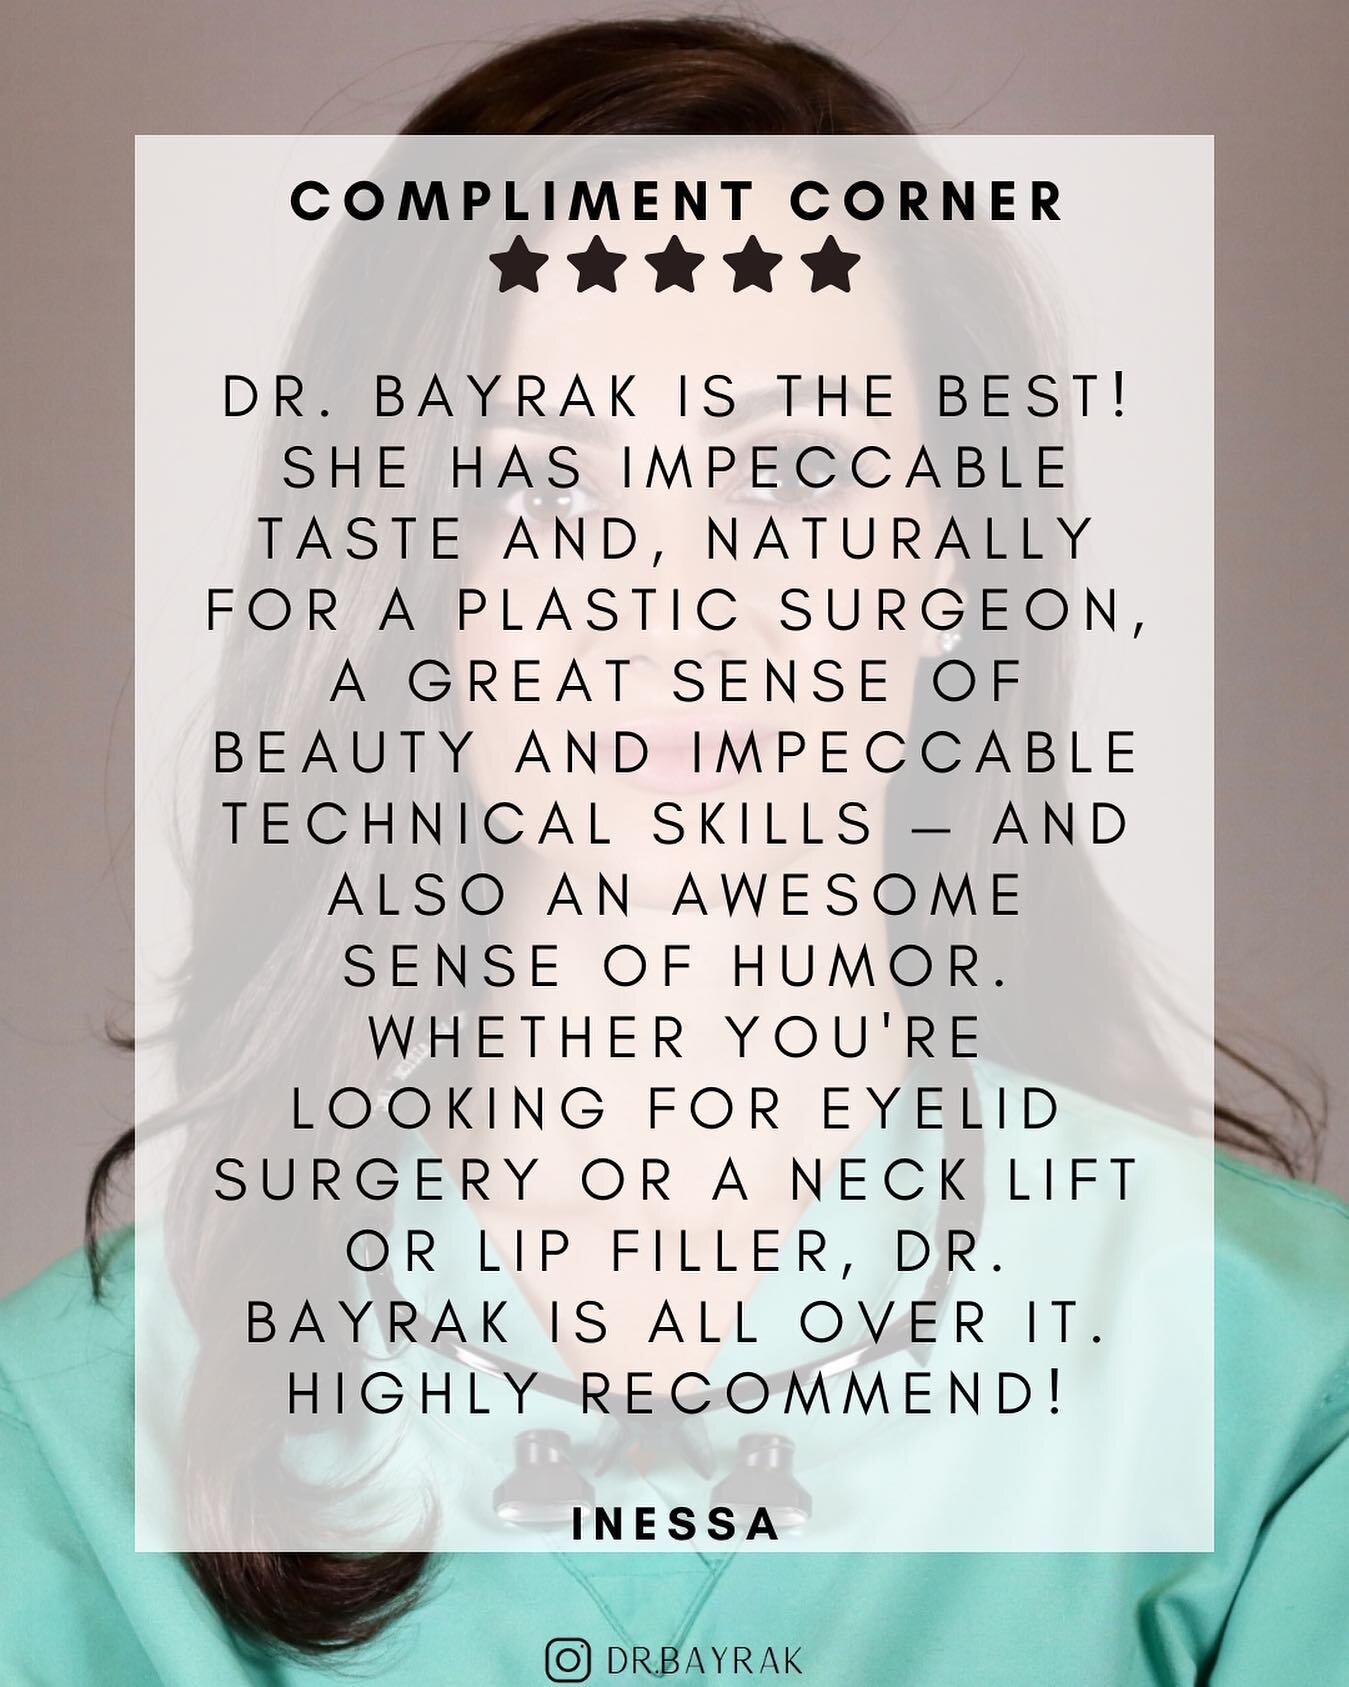 It&rsquo;s a one-stop shop for all things face at @bayrakplasticsurgery, everyone. ⭐️
&bull;
&bull;
&bull; 
Want to chat more with a facial plastic surgeon? Visit bayrakmd.com or click the link in bio to schedule a treatment or consultation.
&bull;
&